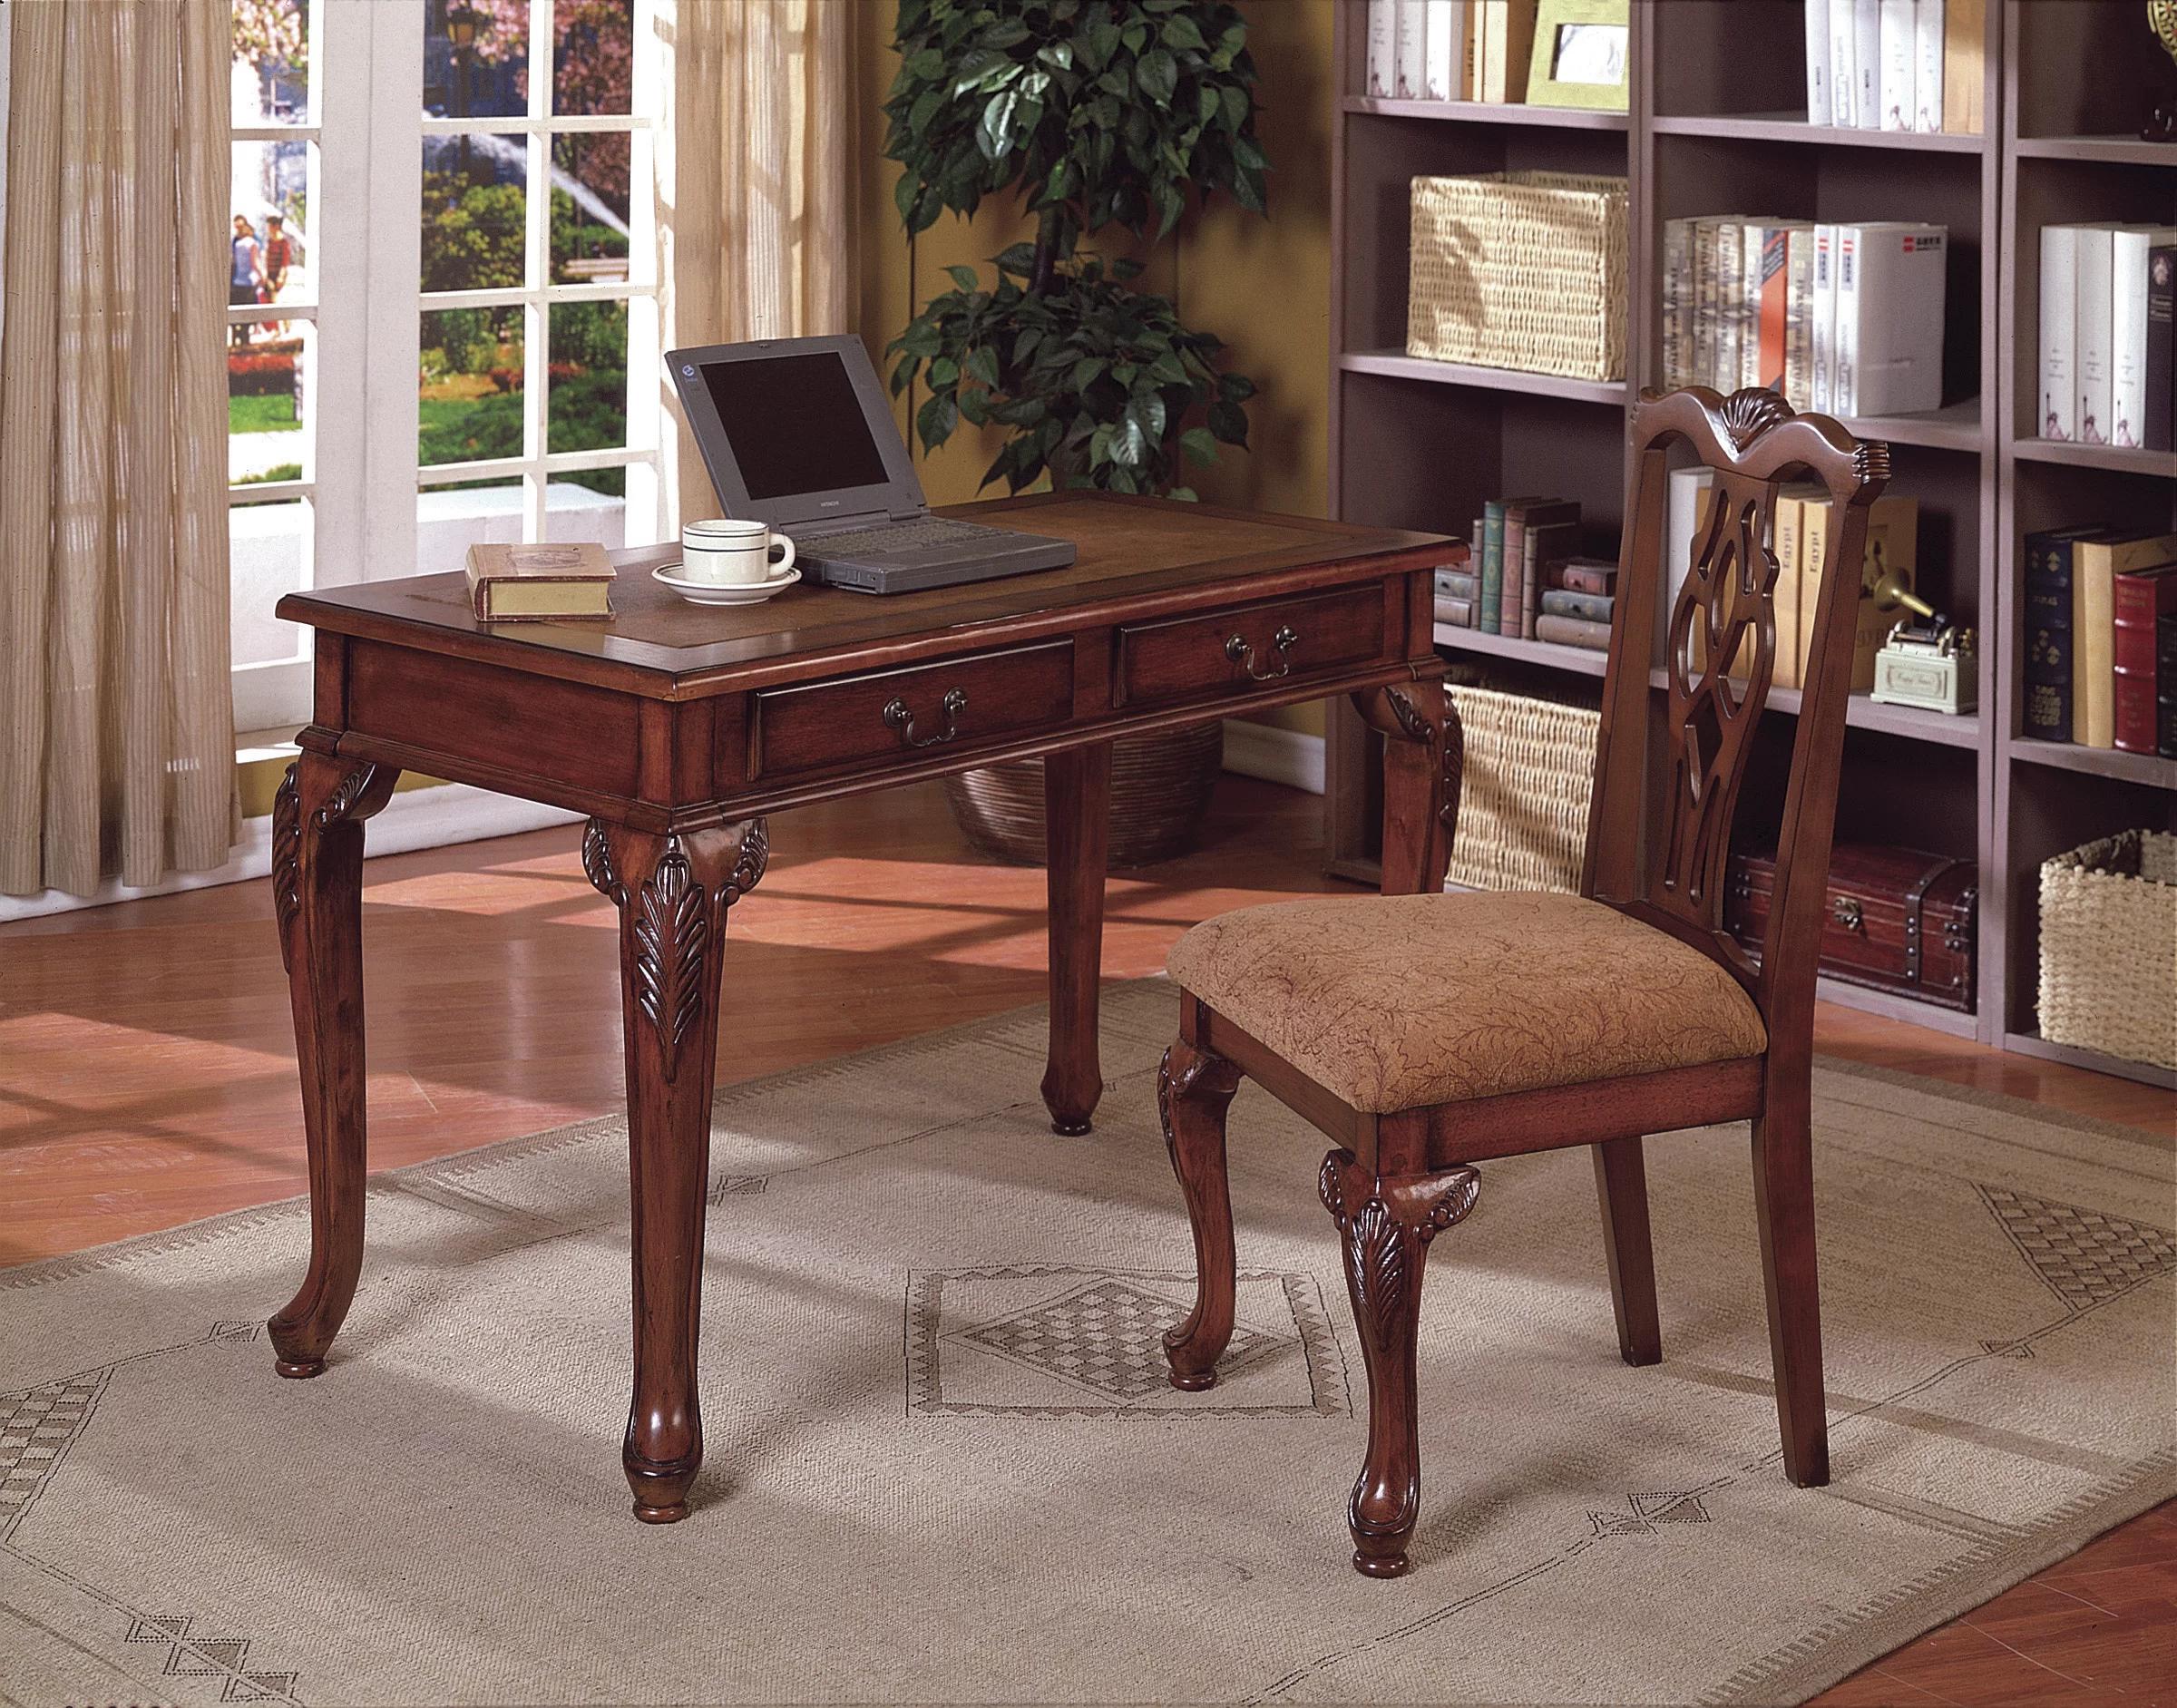 

    
5205SET Rustic Brown Oak Writing Desk with Chair by Crown Mark Fairfax 5205SET
